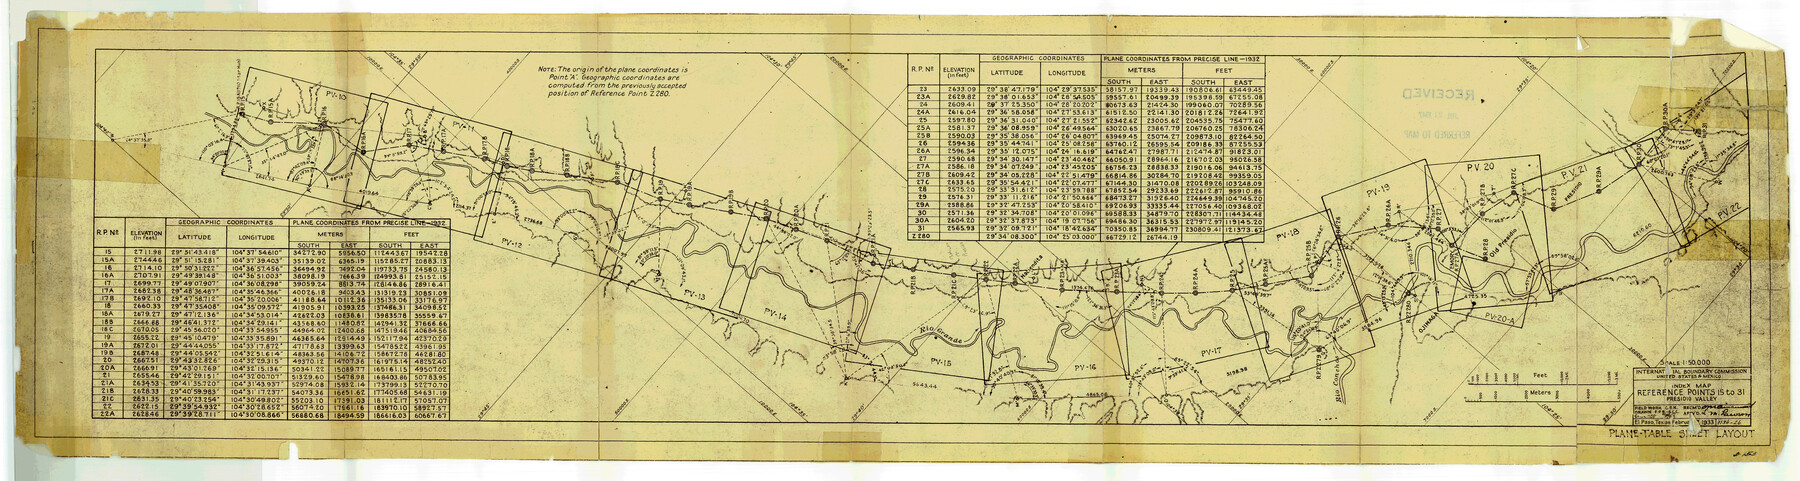 9782, Presidio County Rolled Sketch 96, General Map Collection